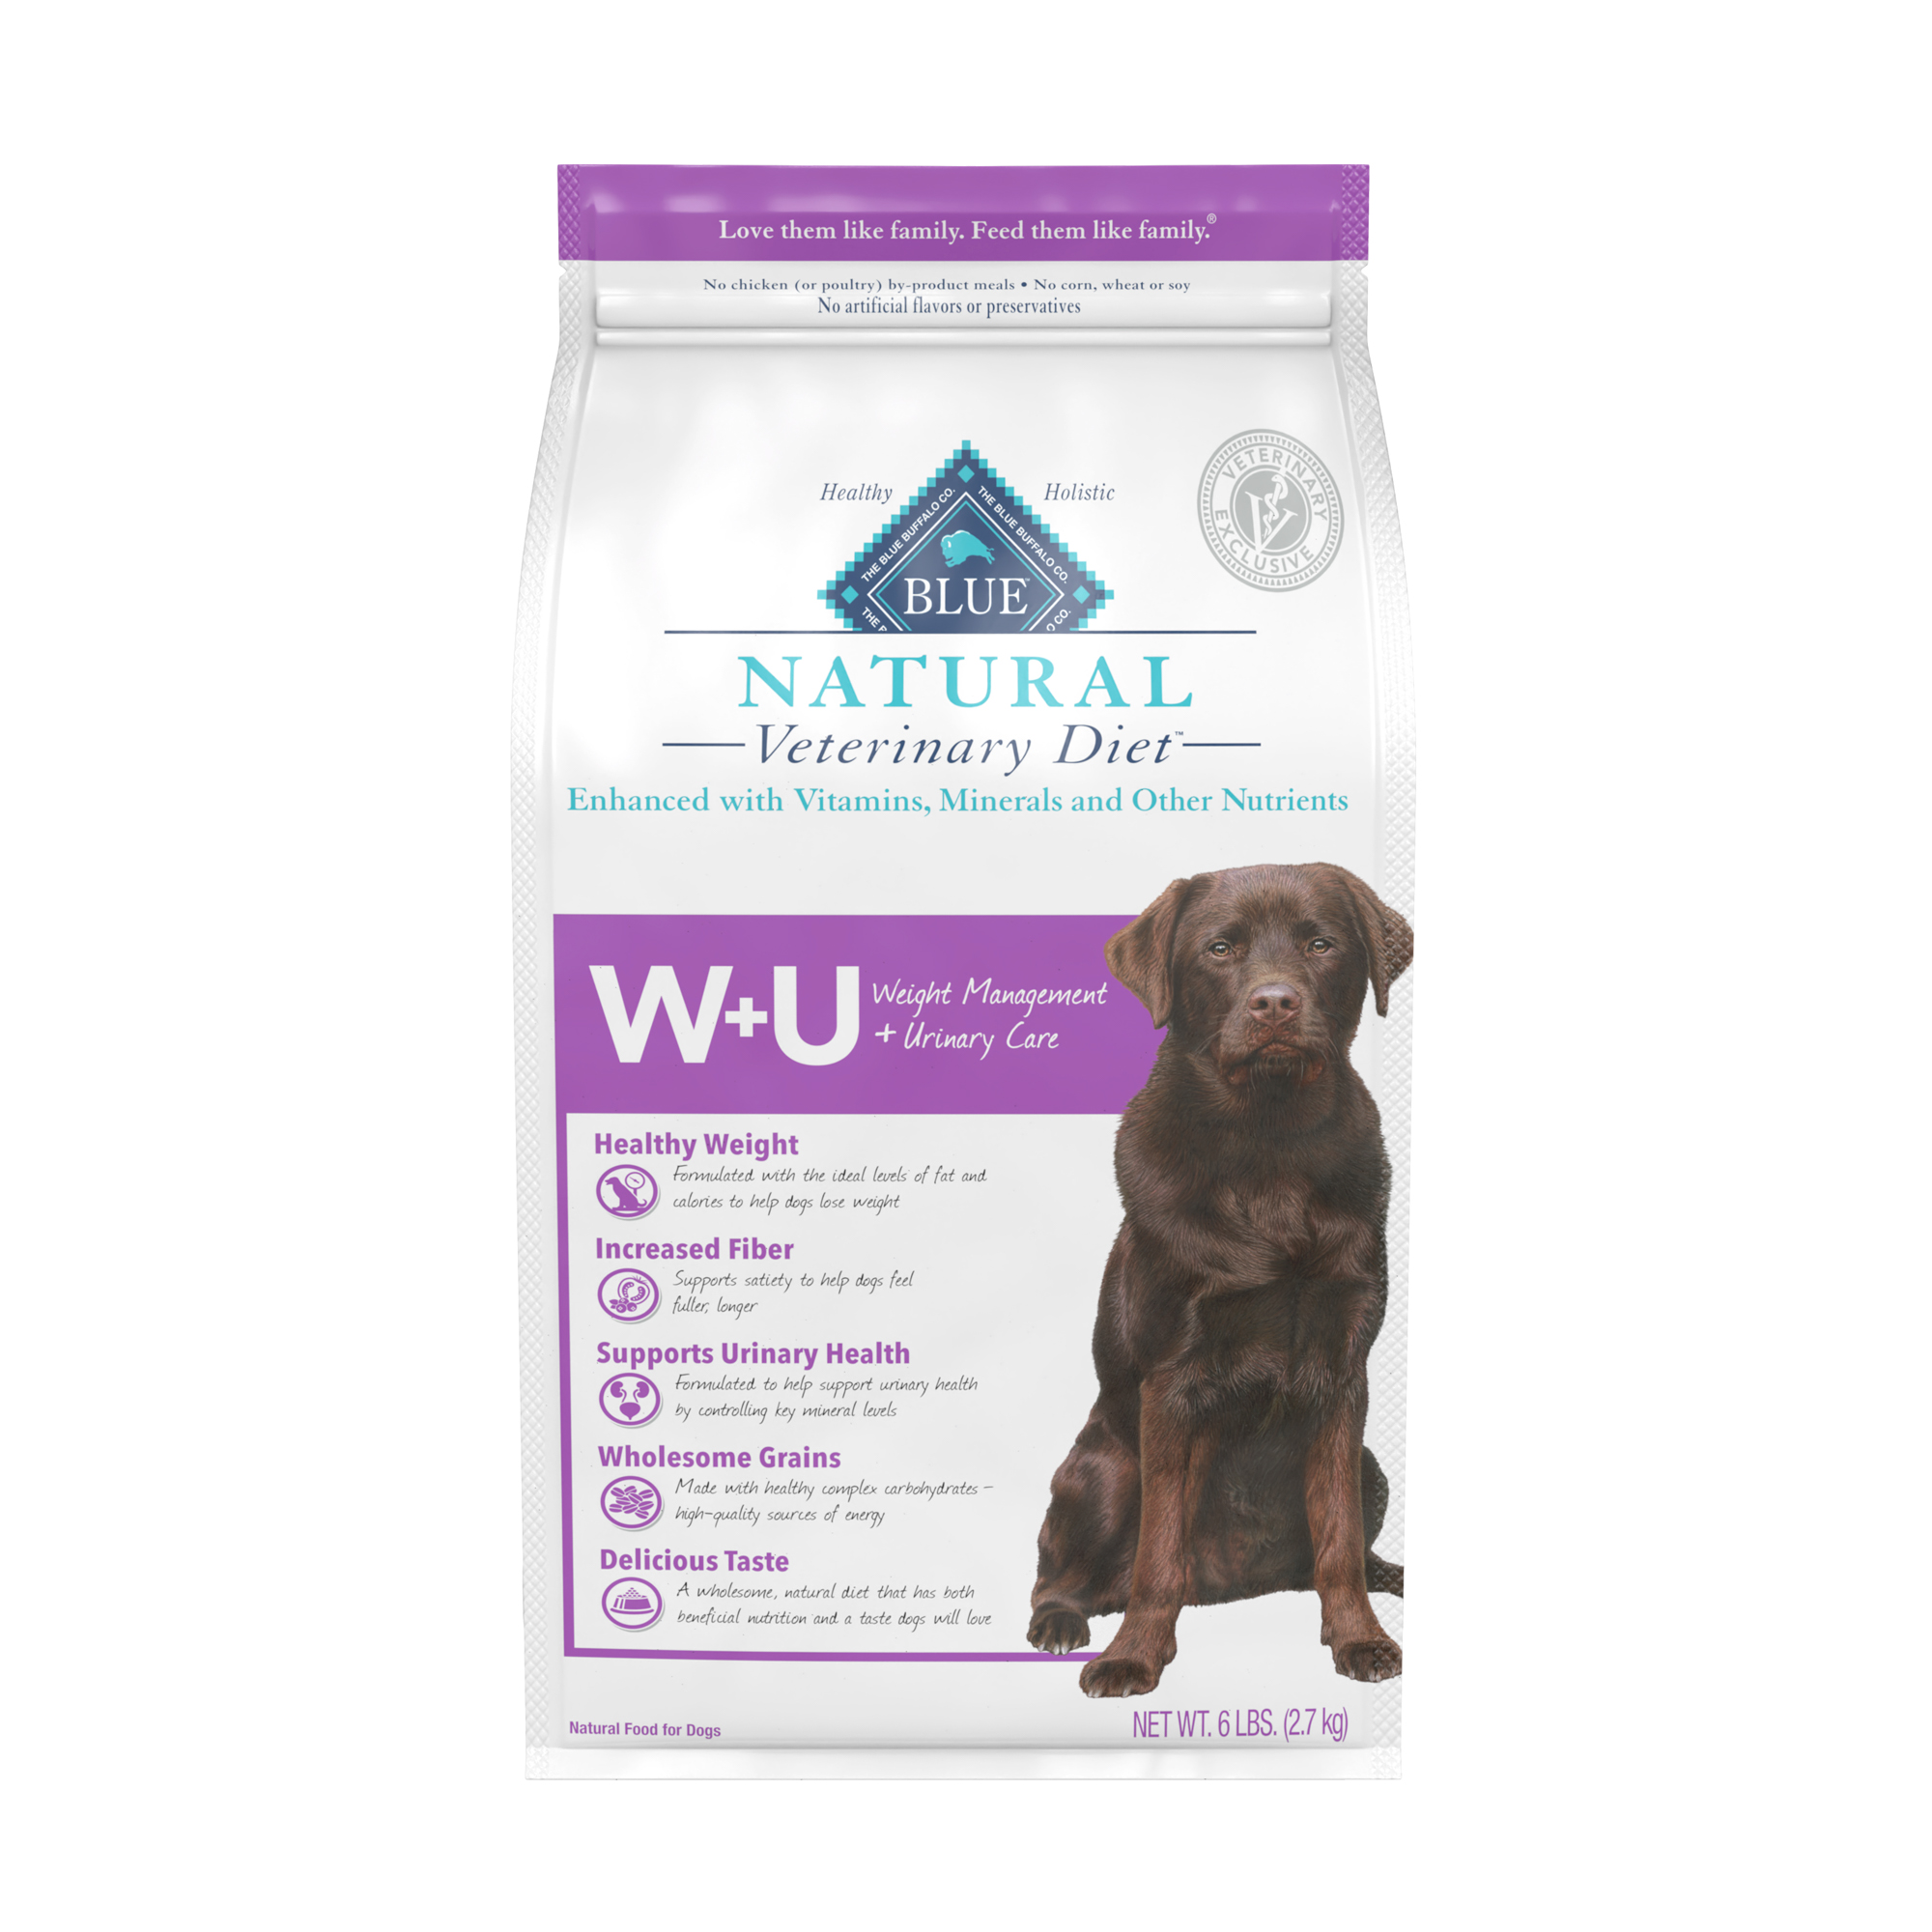 BLUE Natural Veterinary Diet W+U Weight Management + Urinary Care Dry Dog Food Usage